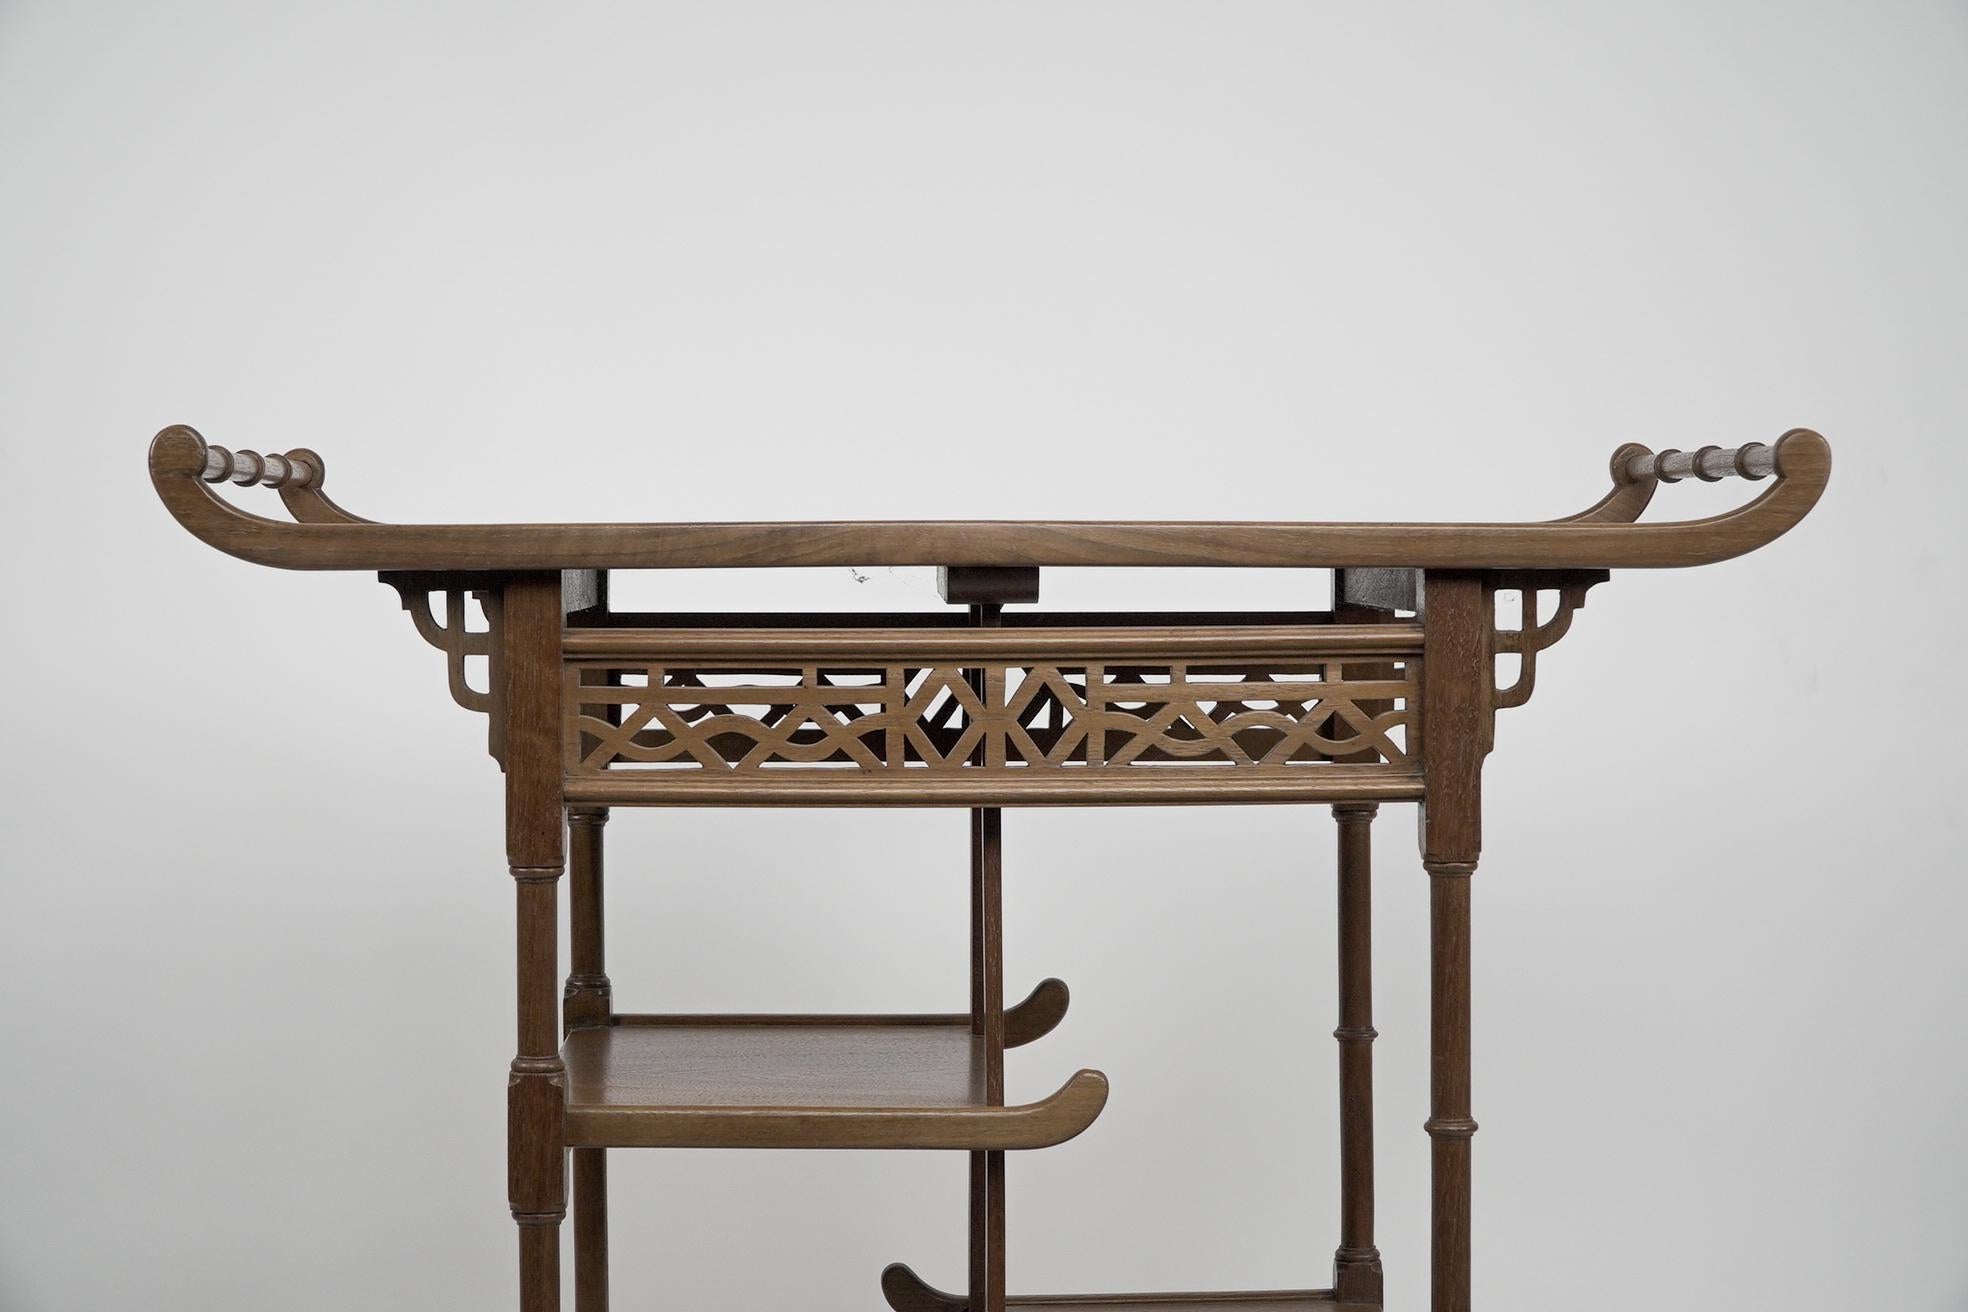 Beech An Anglo-Japanese beech wood side table with fretwork &pagoda style turned rails For Sale